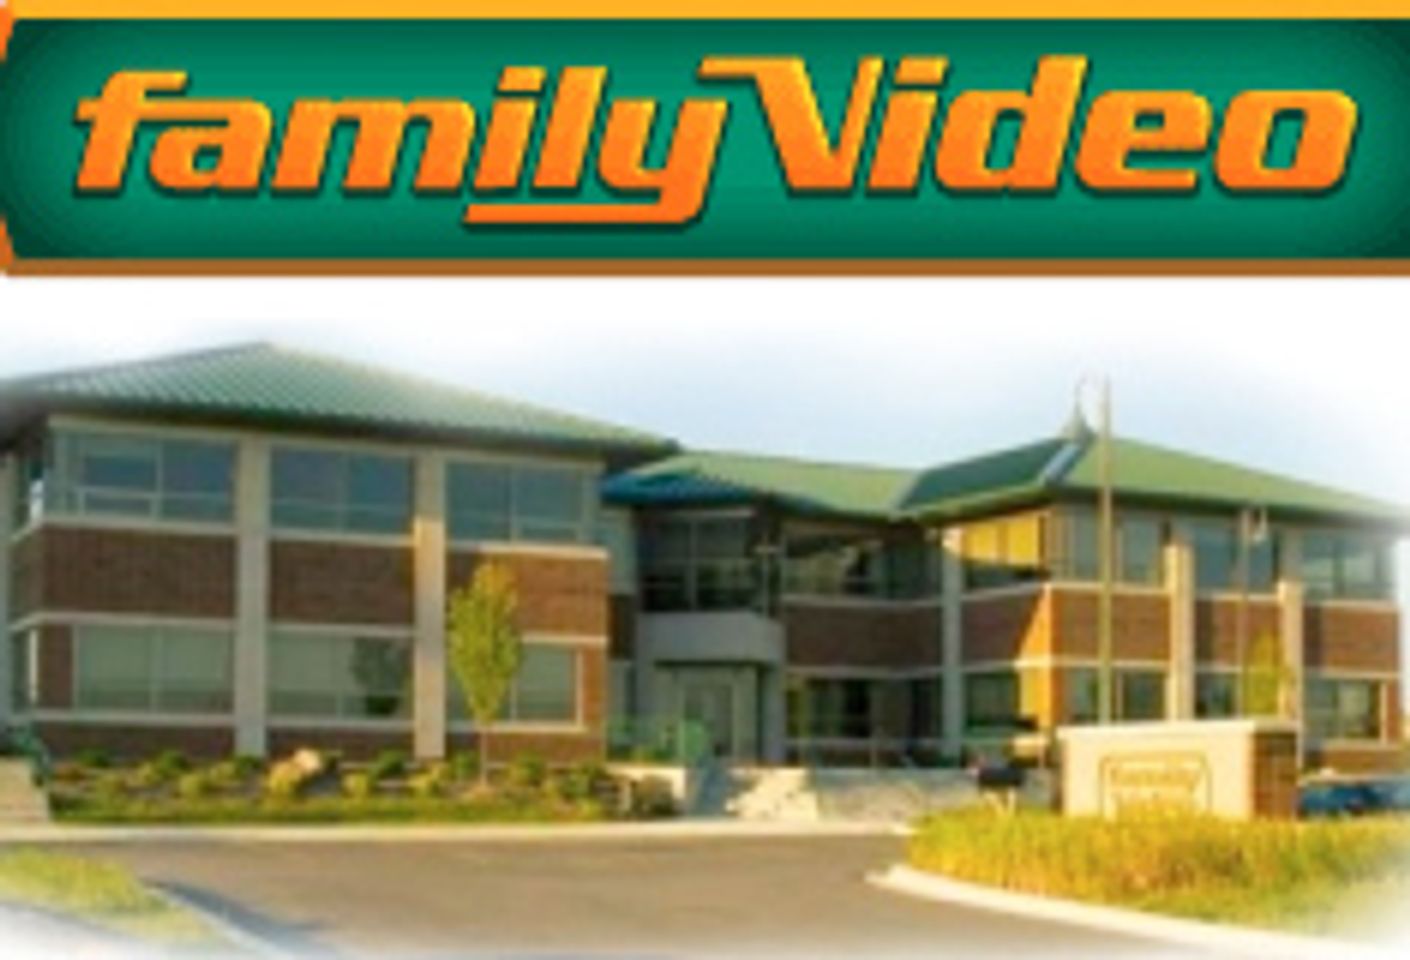 Iowa Town Cancels Agreement with Family Video